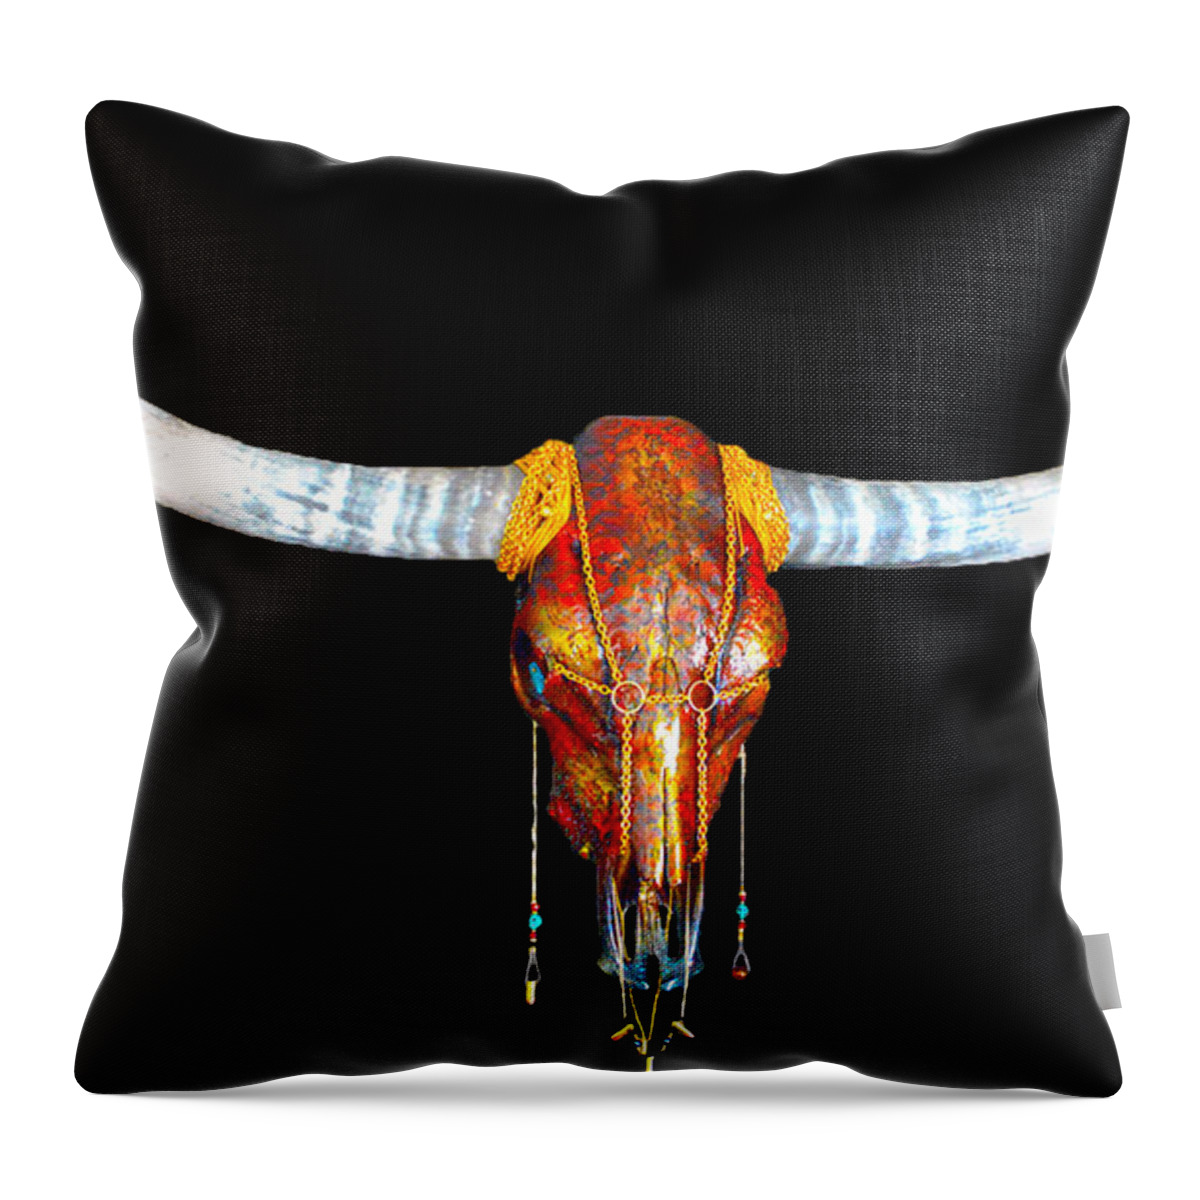  Longhorn Paintings Throw Pillow featuring the mixed media Red and Gold Illuminating Longhorn Skull #1 by Mayhem Mediums